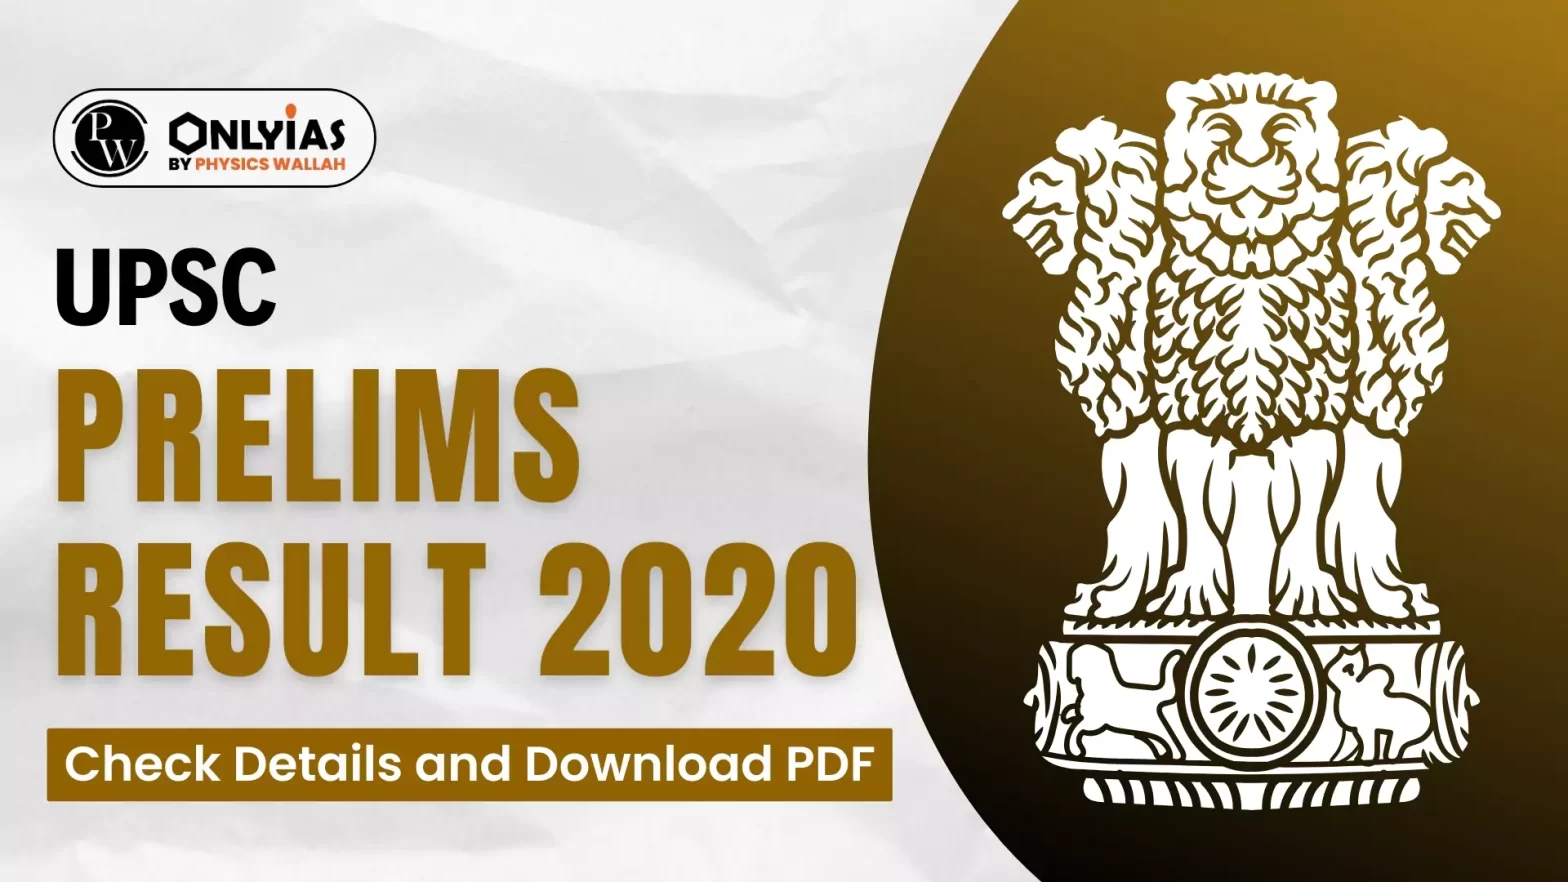 UPSC Prelims Result 2020, Check Details and Download PDF